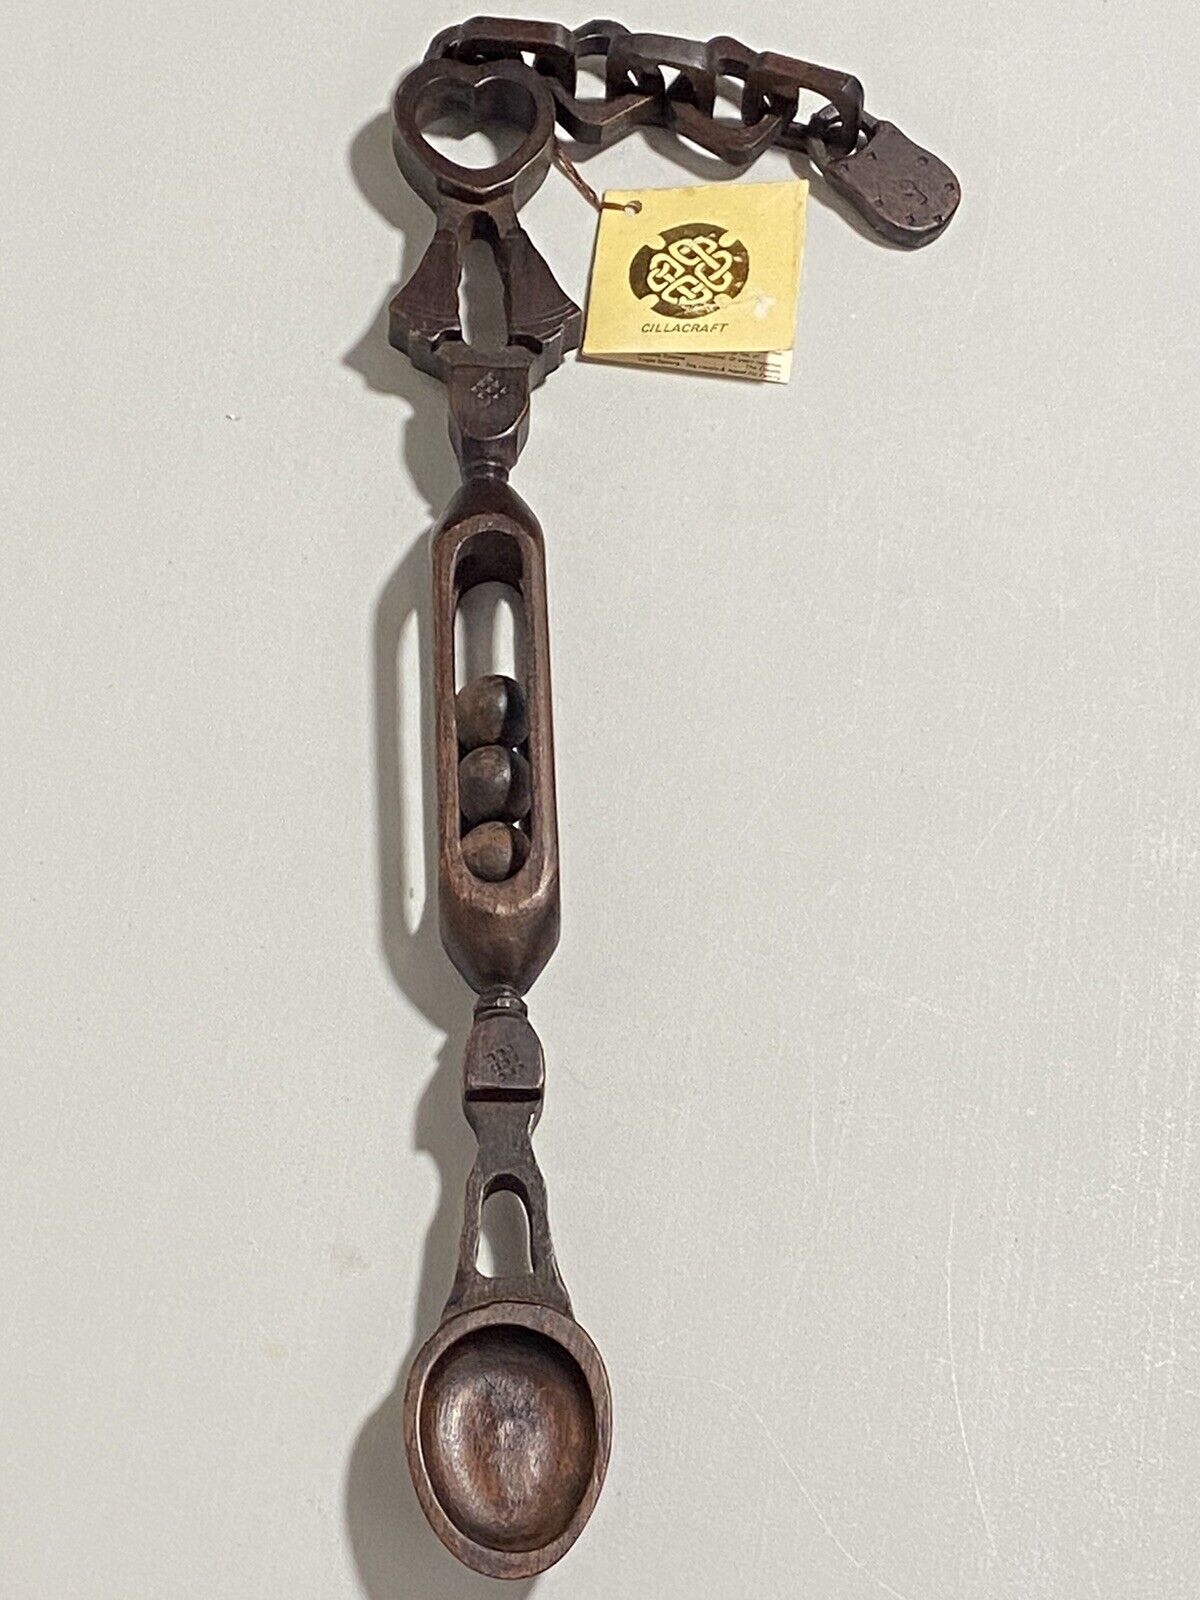 Welsh Wales Celtic Love Spoon Hand Carved Wood With Heart Balls Bells Lock Chain